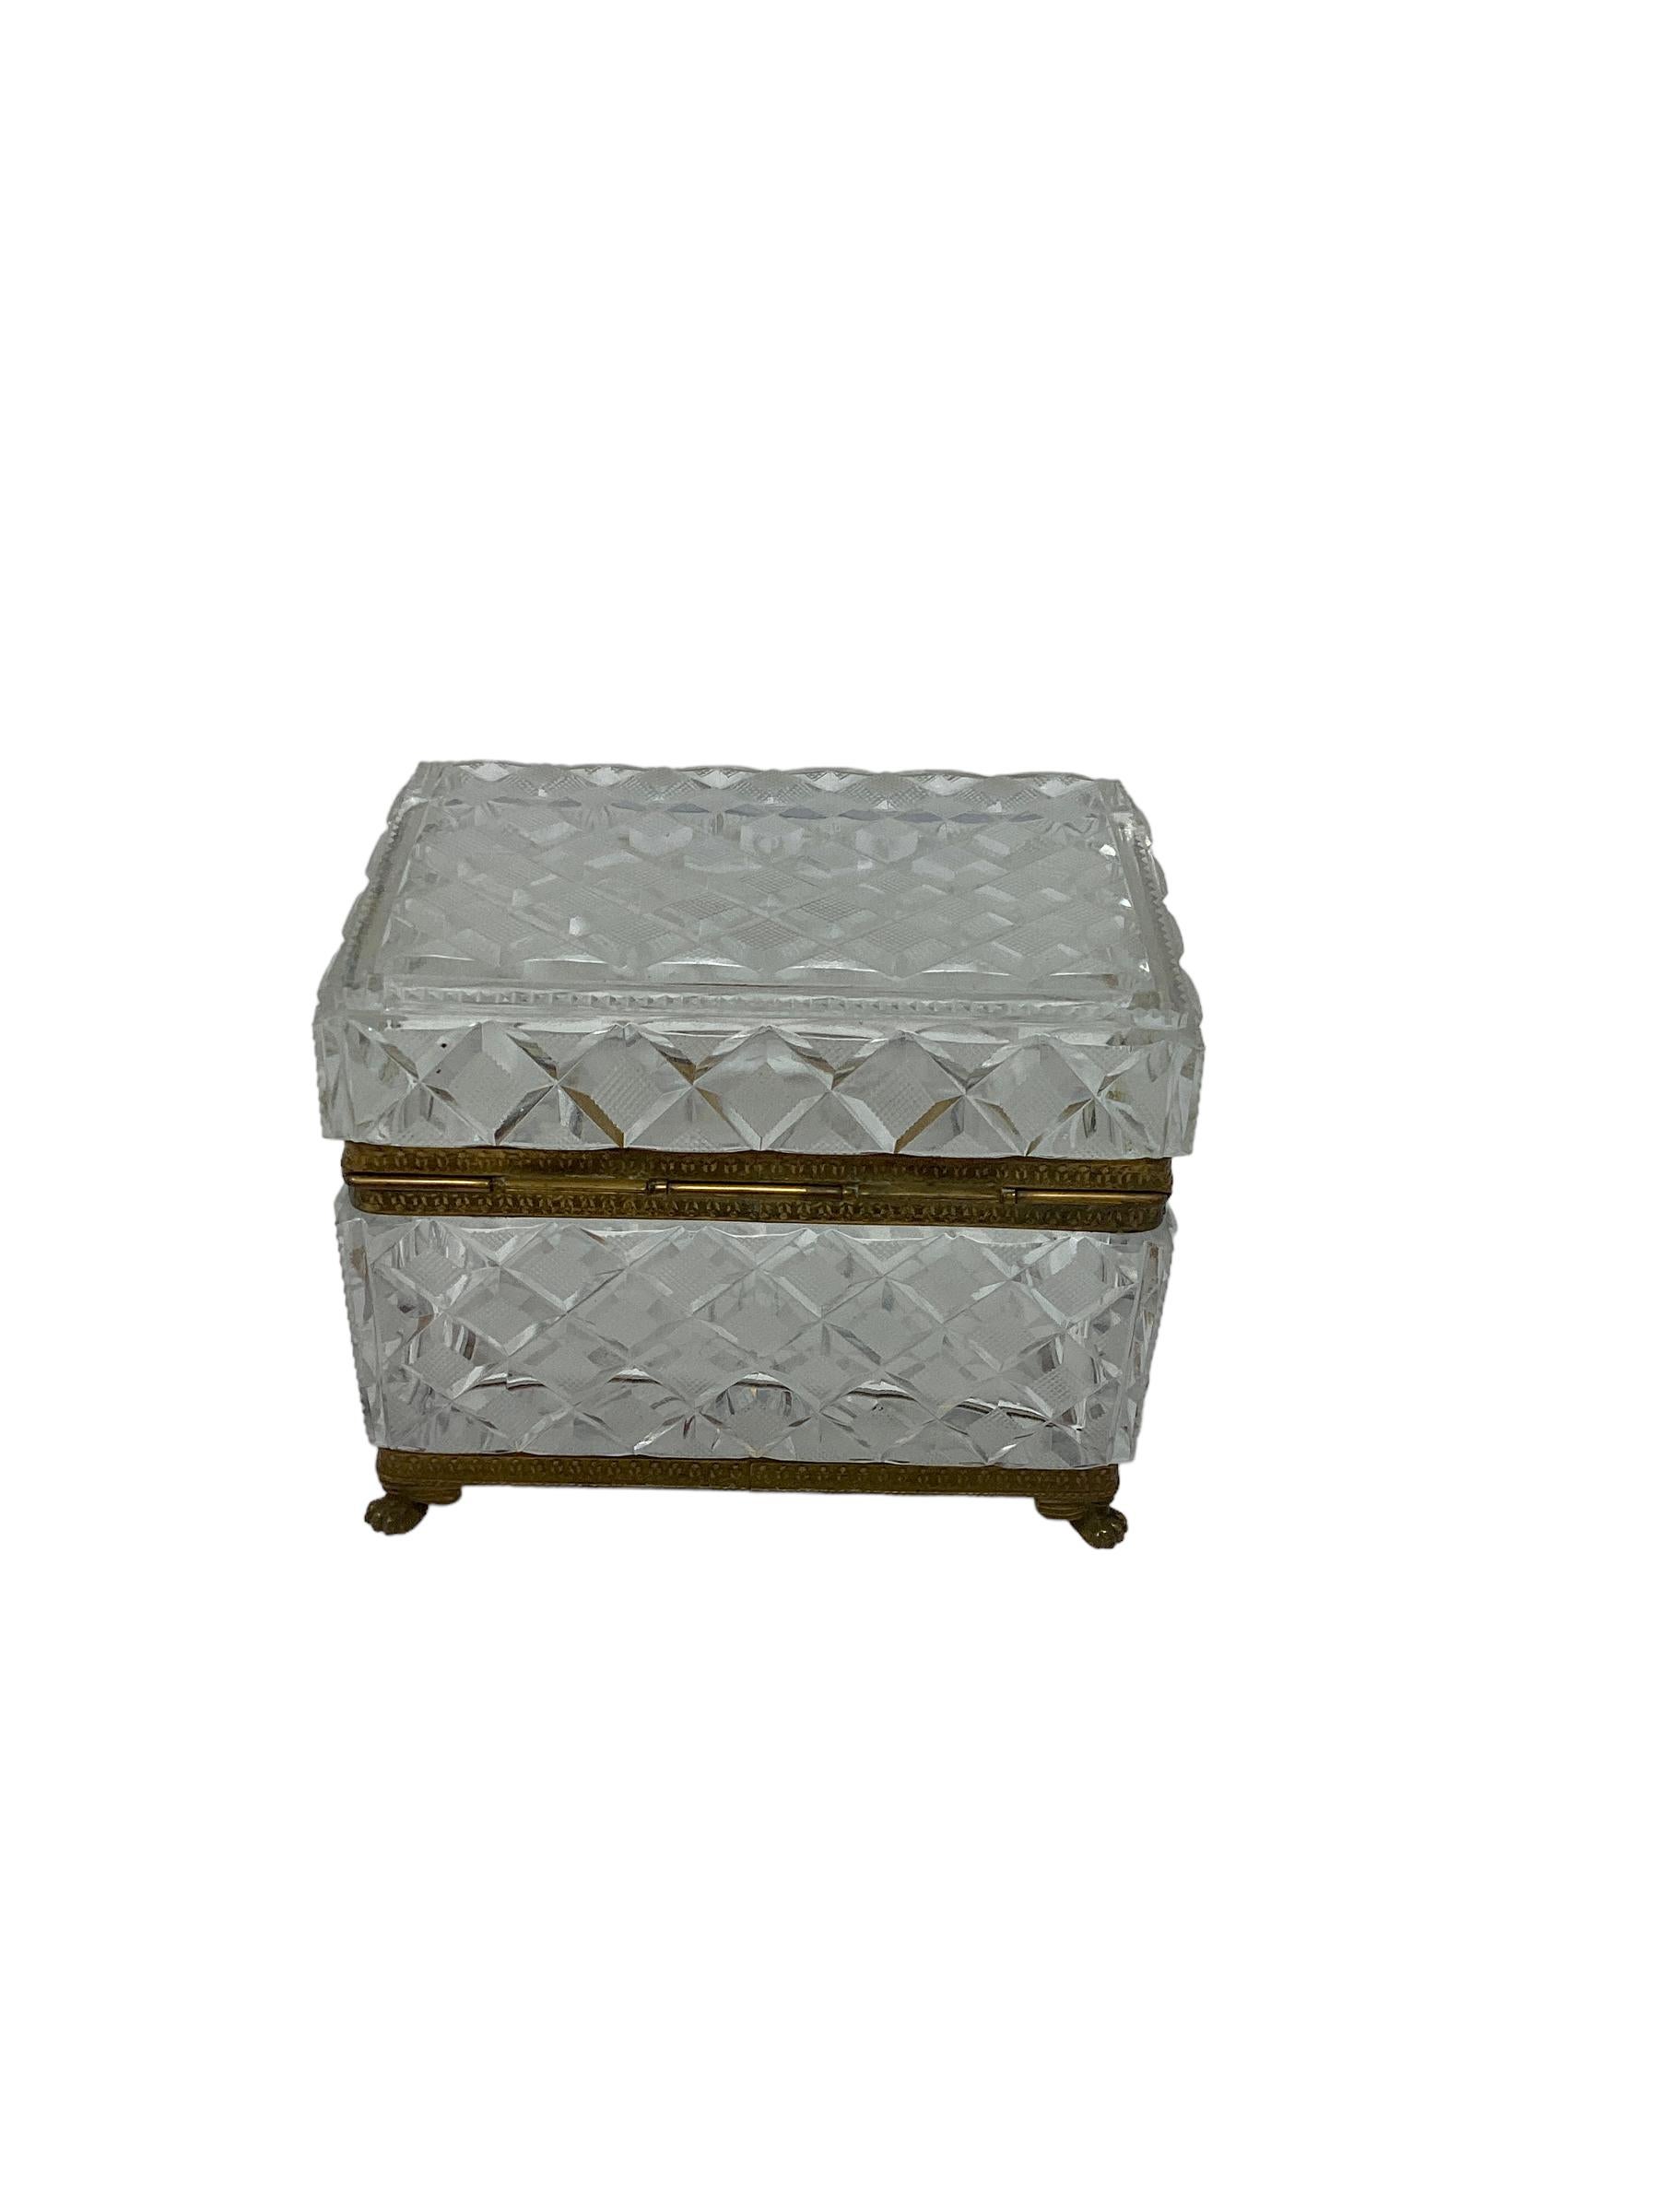 19th Century Baccarat Cut Crystal Box or Casket with Gilt Bronze Mounts  For Sale 3